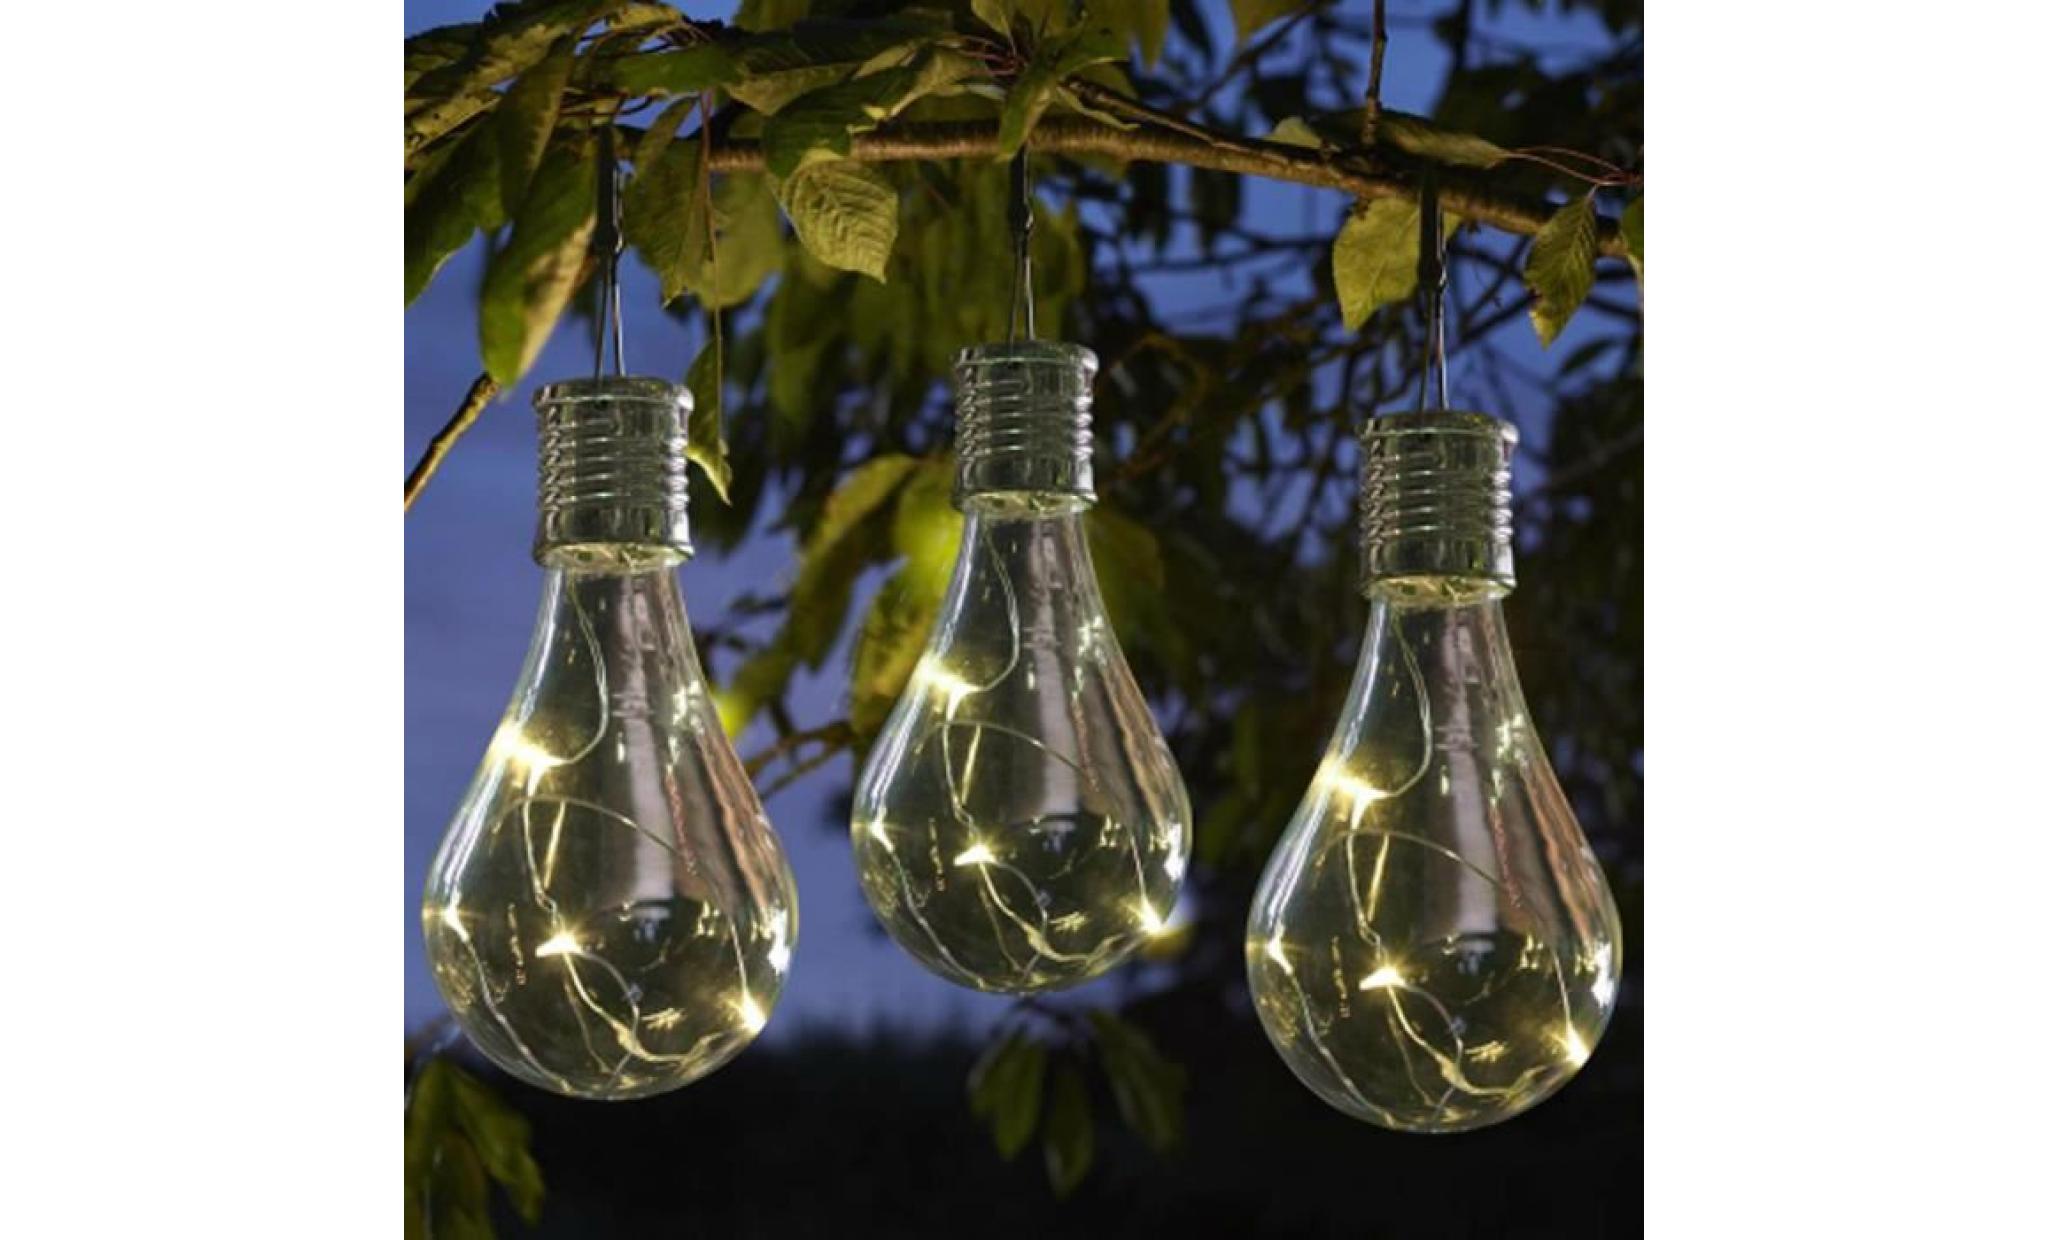 waterproof solar rotatable outdoor garden camping hanging led light lamp bulb  qinhig968 pas cher